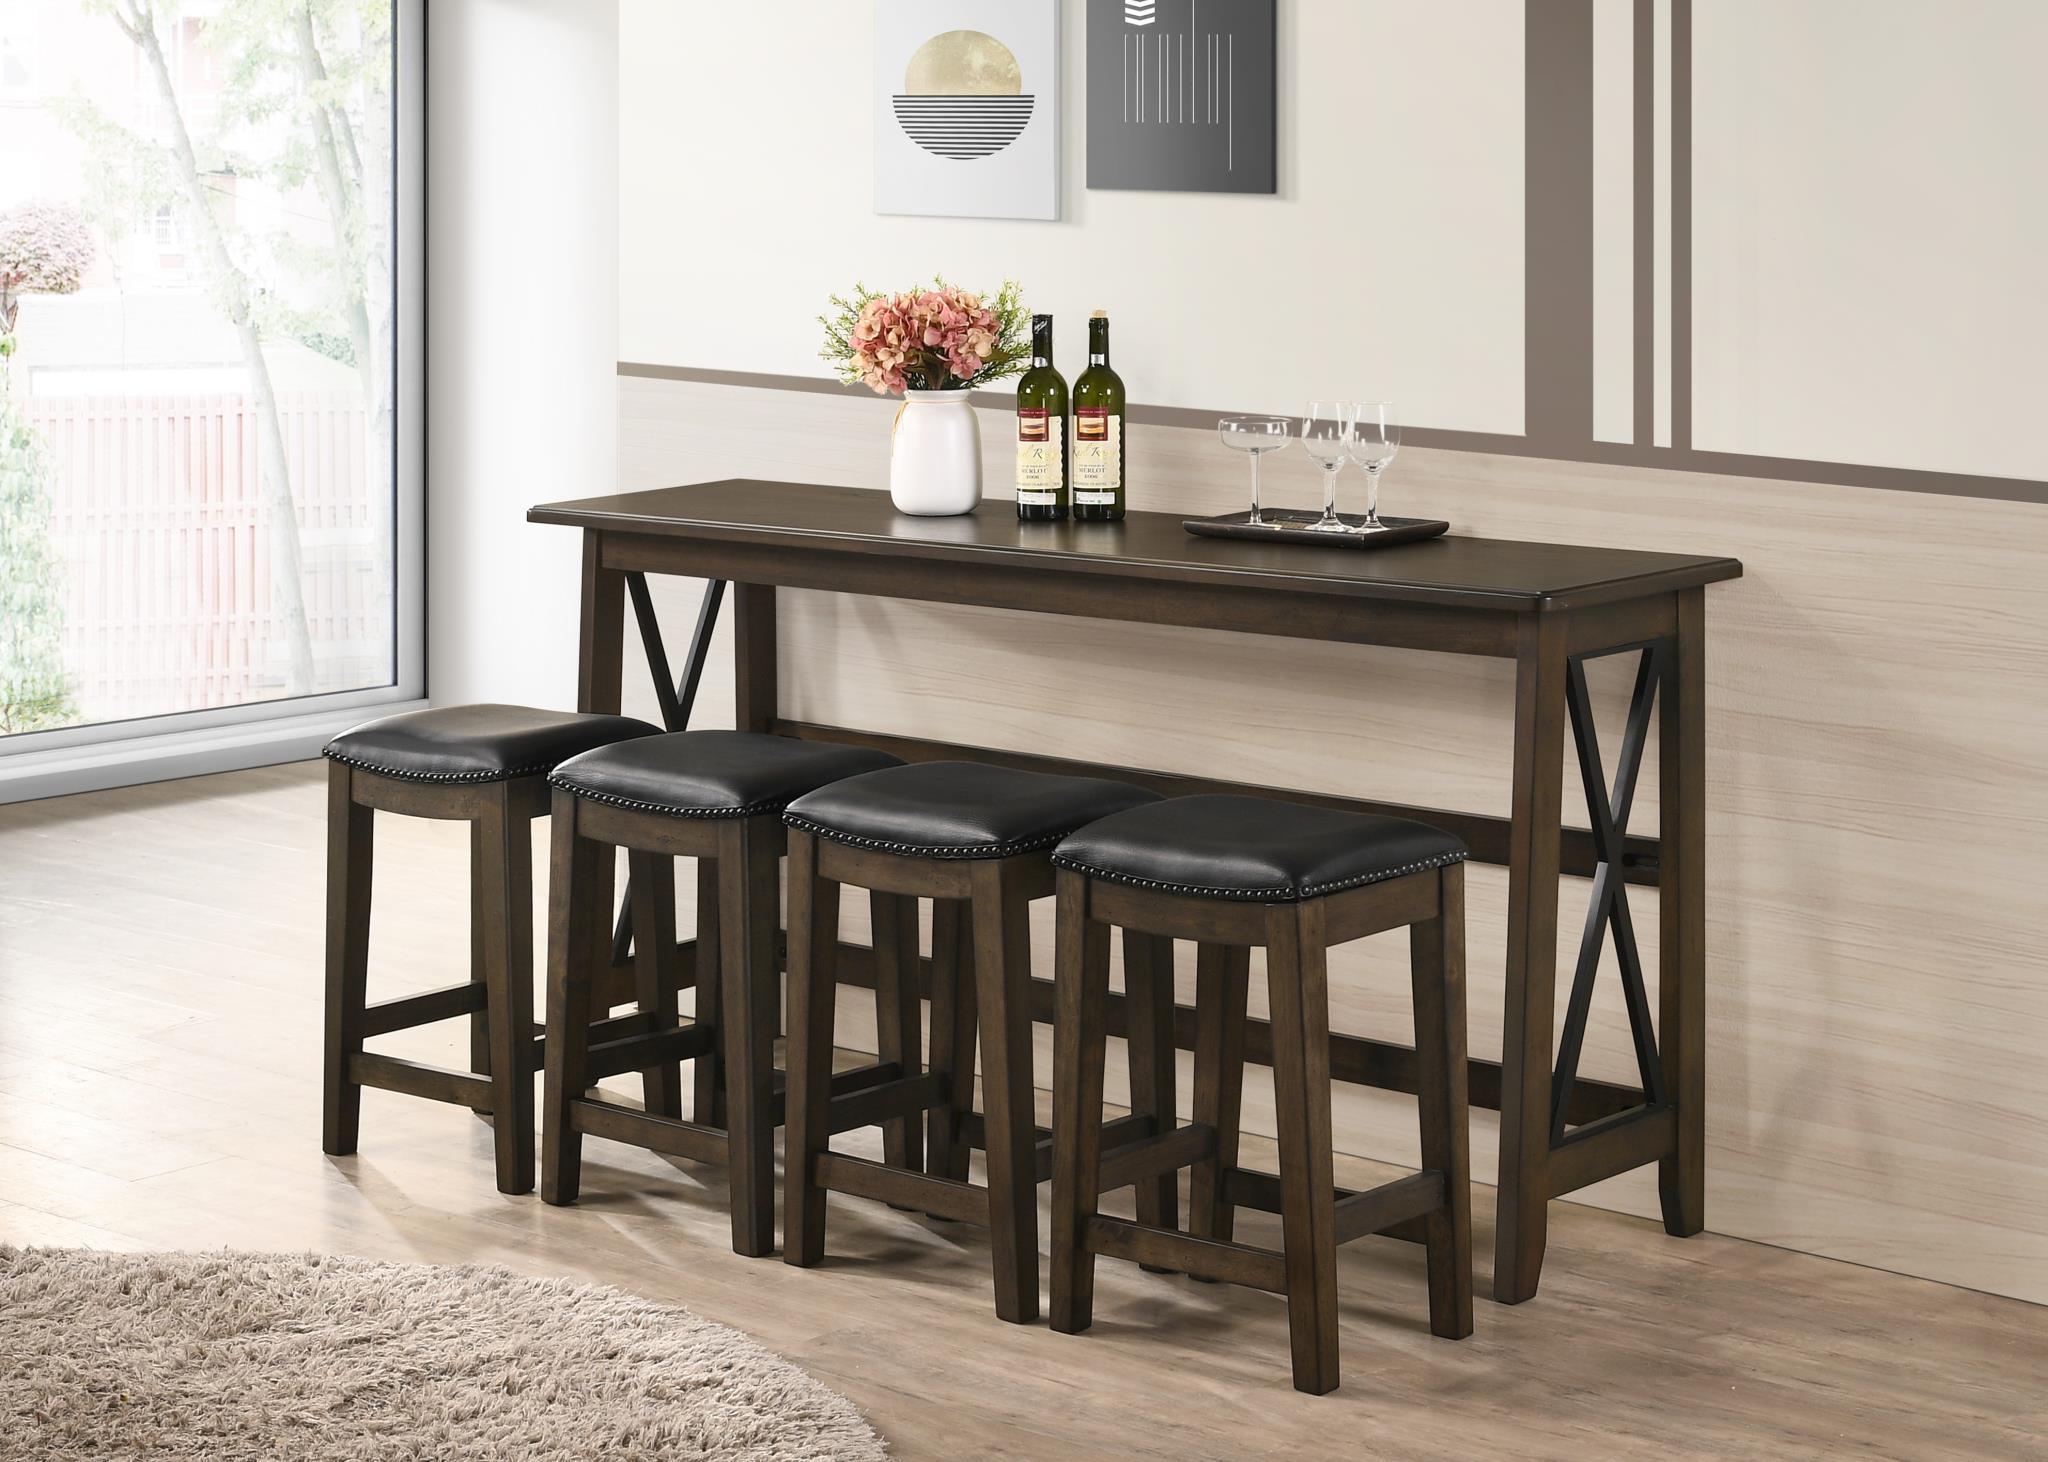 Transitional, Farmhouse Counter Table Set Carmina 5938DS-533 in Brown, Black 